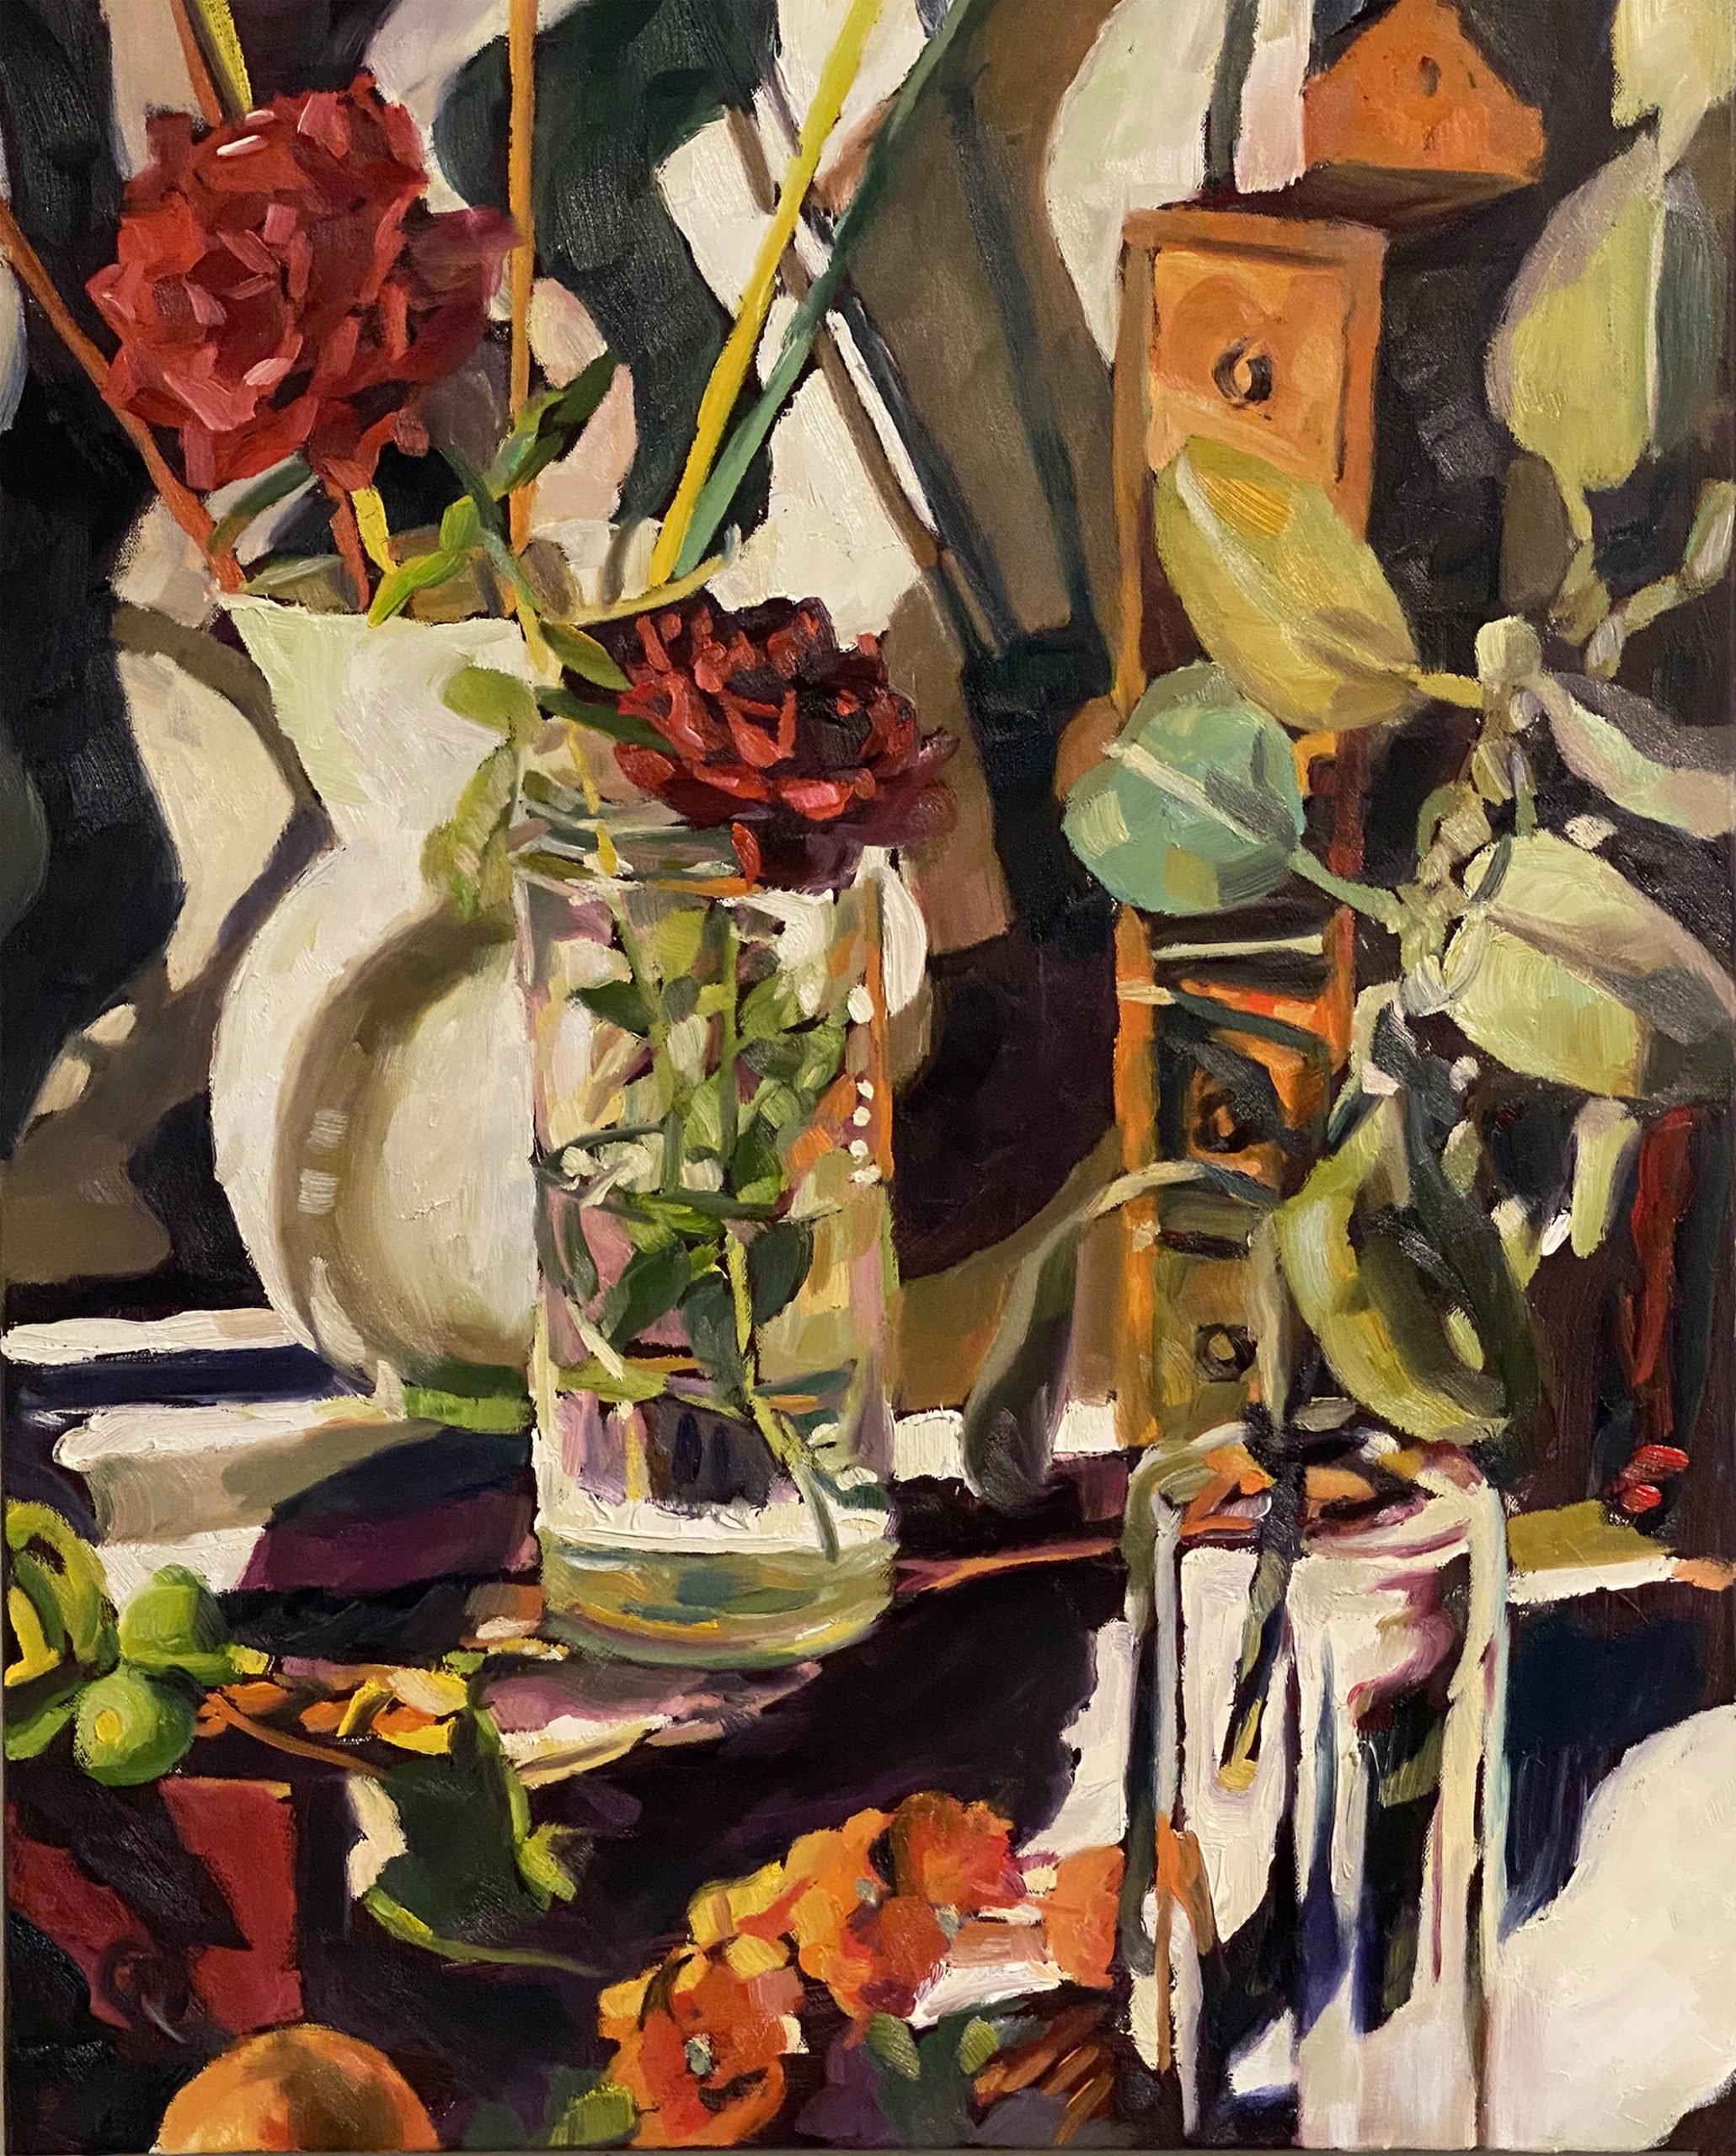 Rosemary Valadon 'Arrows Roses' oil on canvas 76 x 61cm $9,600 SOLD